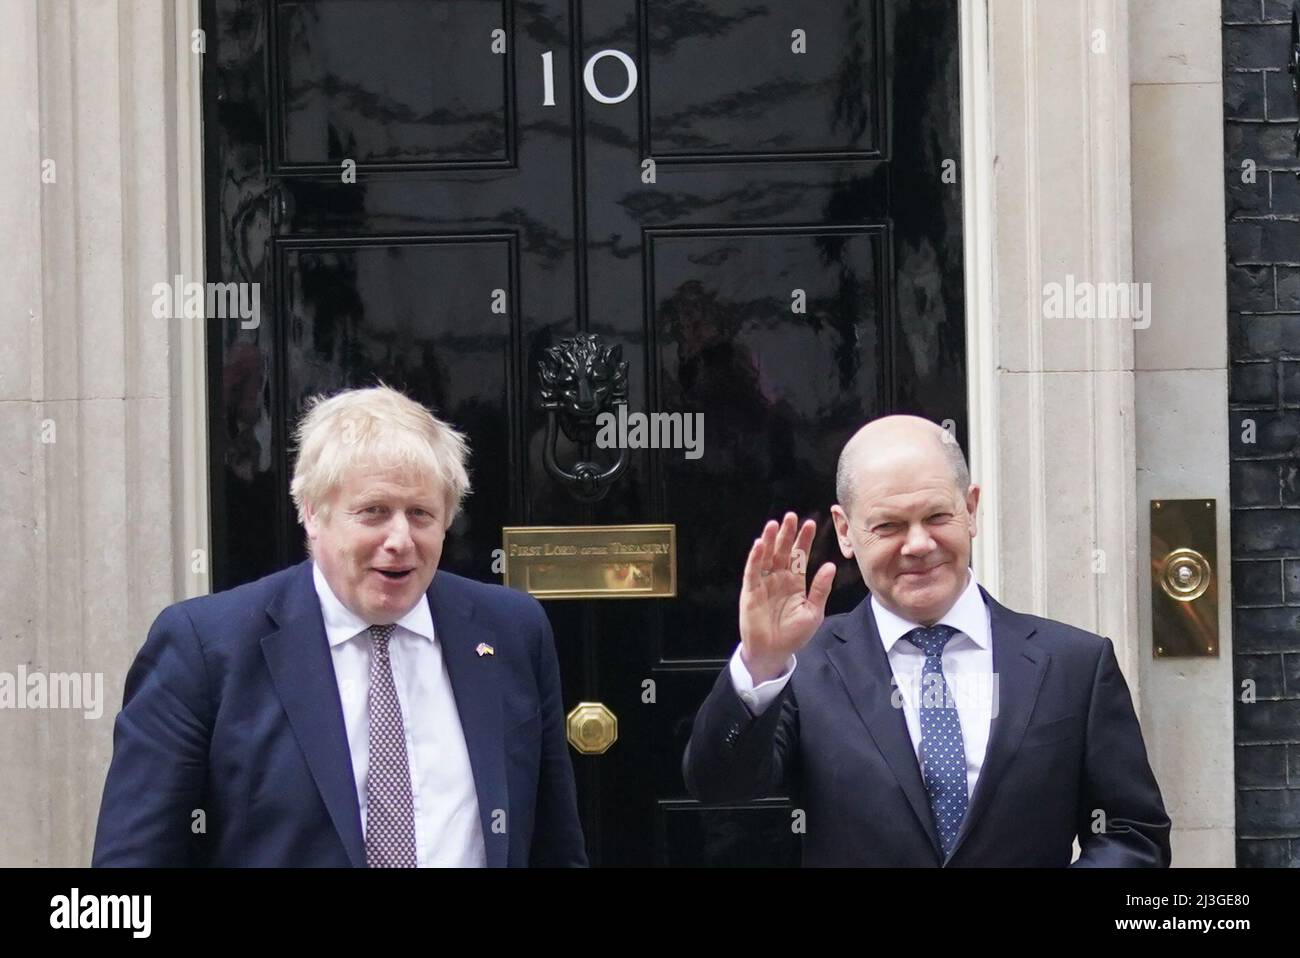 German Chancellor Olaf Scholz arrives at 10 Downing Street, London for a meeting with Prime Minister Boris Johnson. Picture date: Friday April 8, 2022. Stock Photo